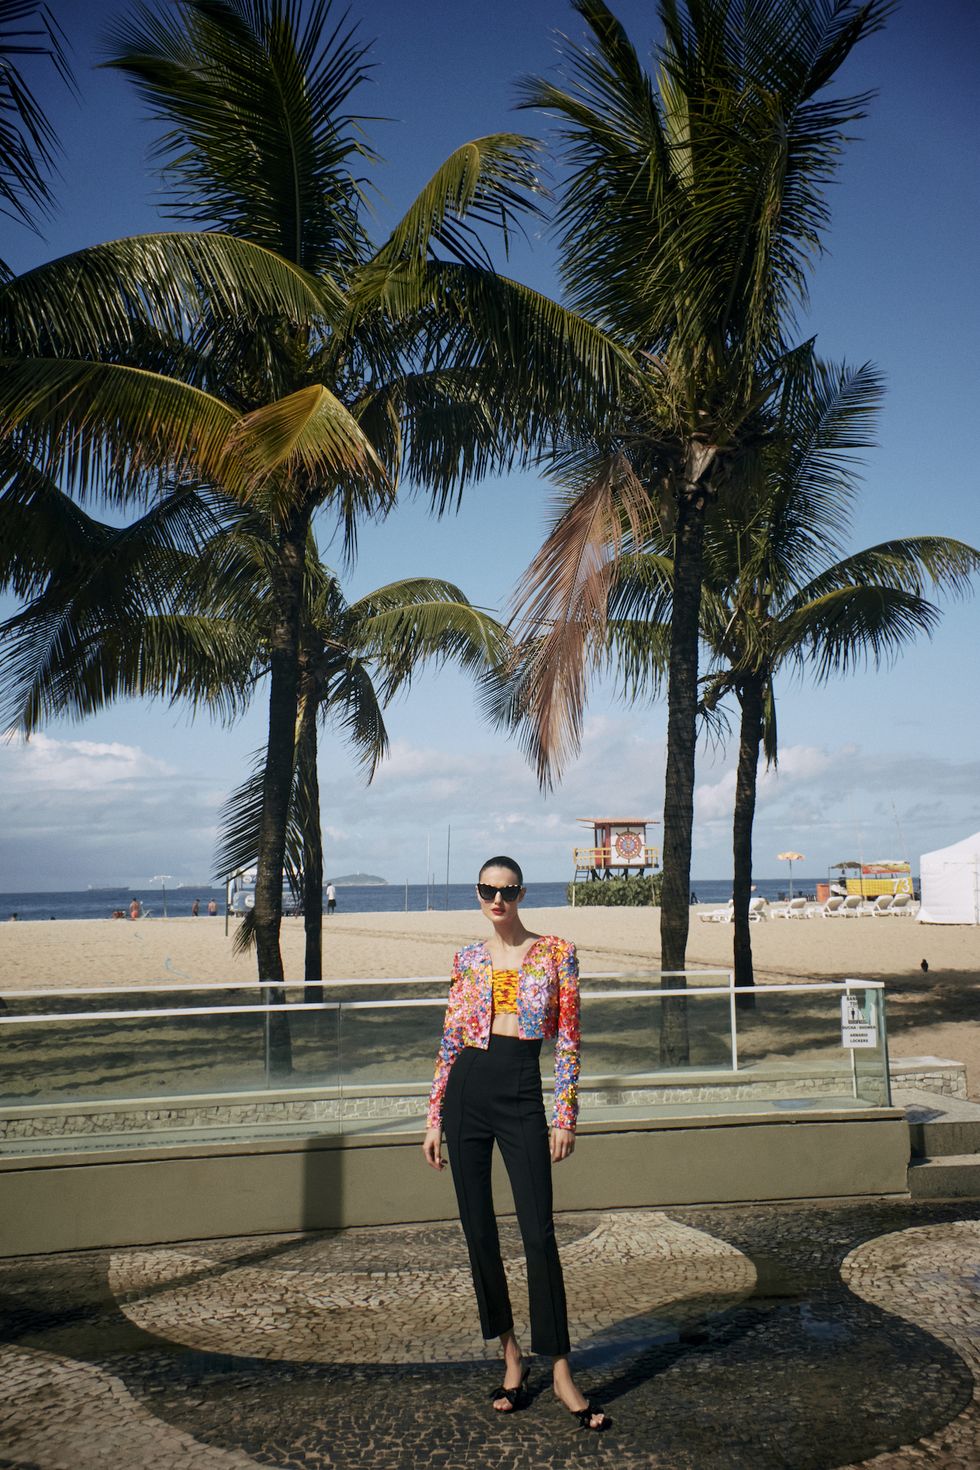 a person standing next to a palm tree on a beach